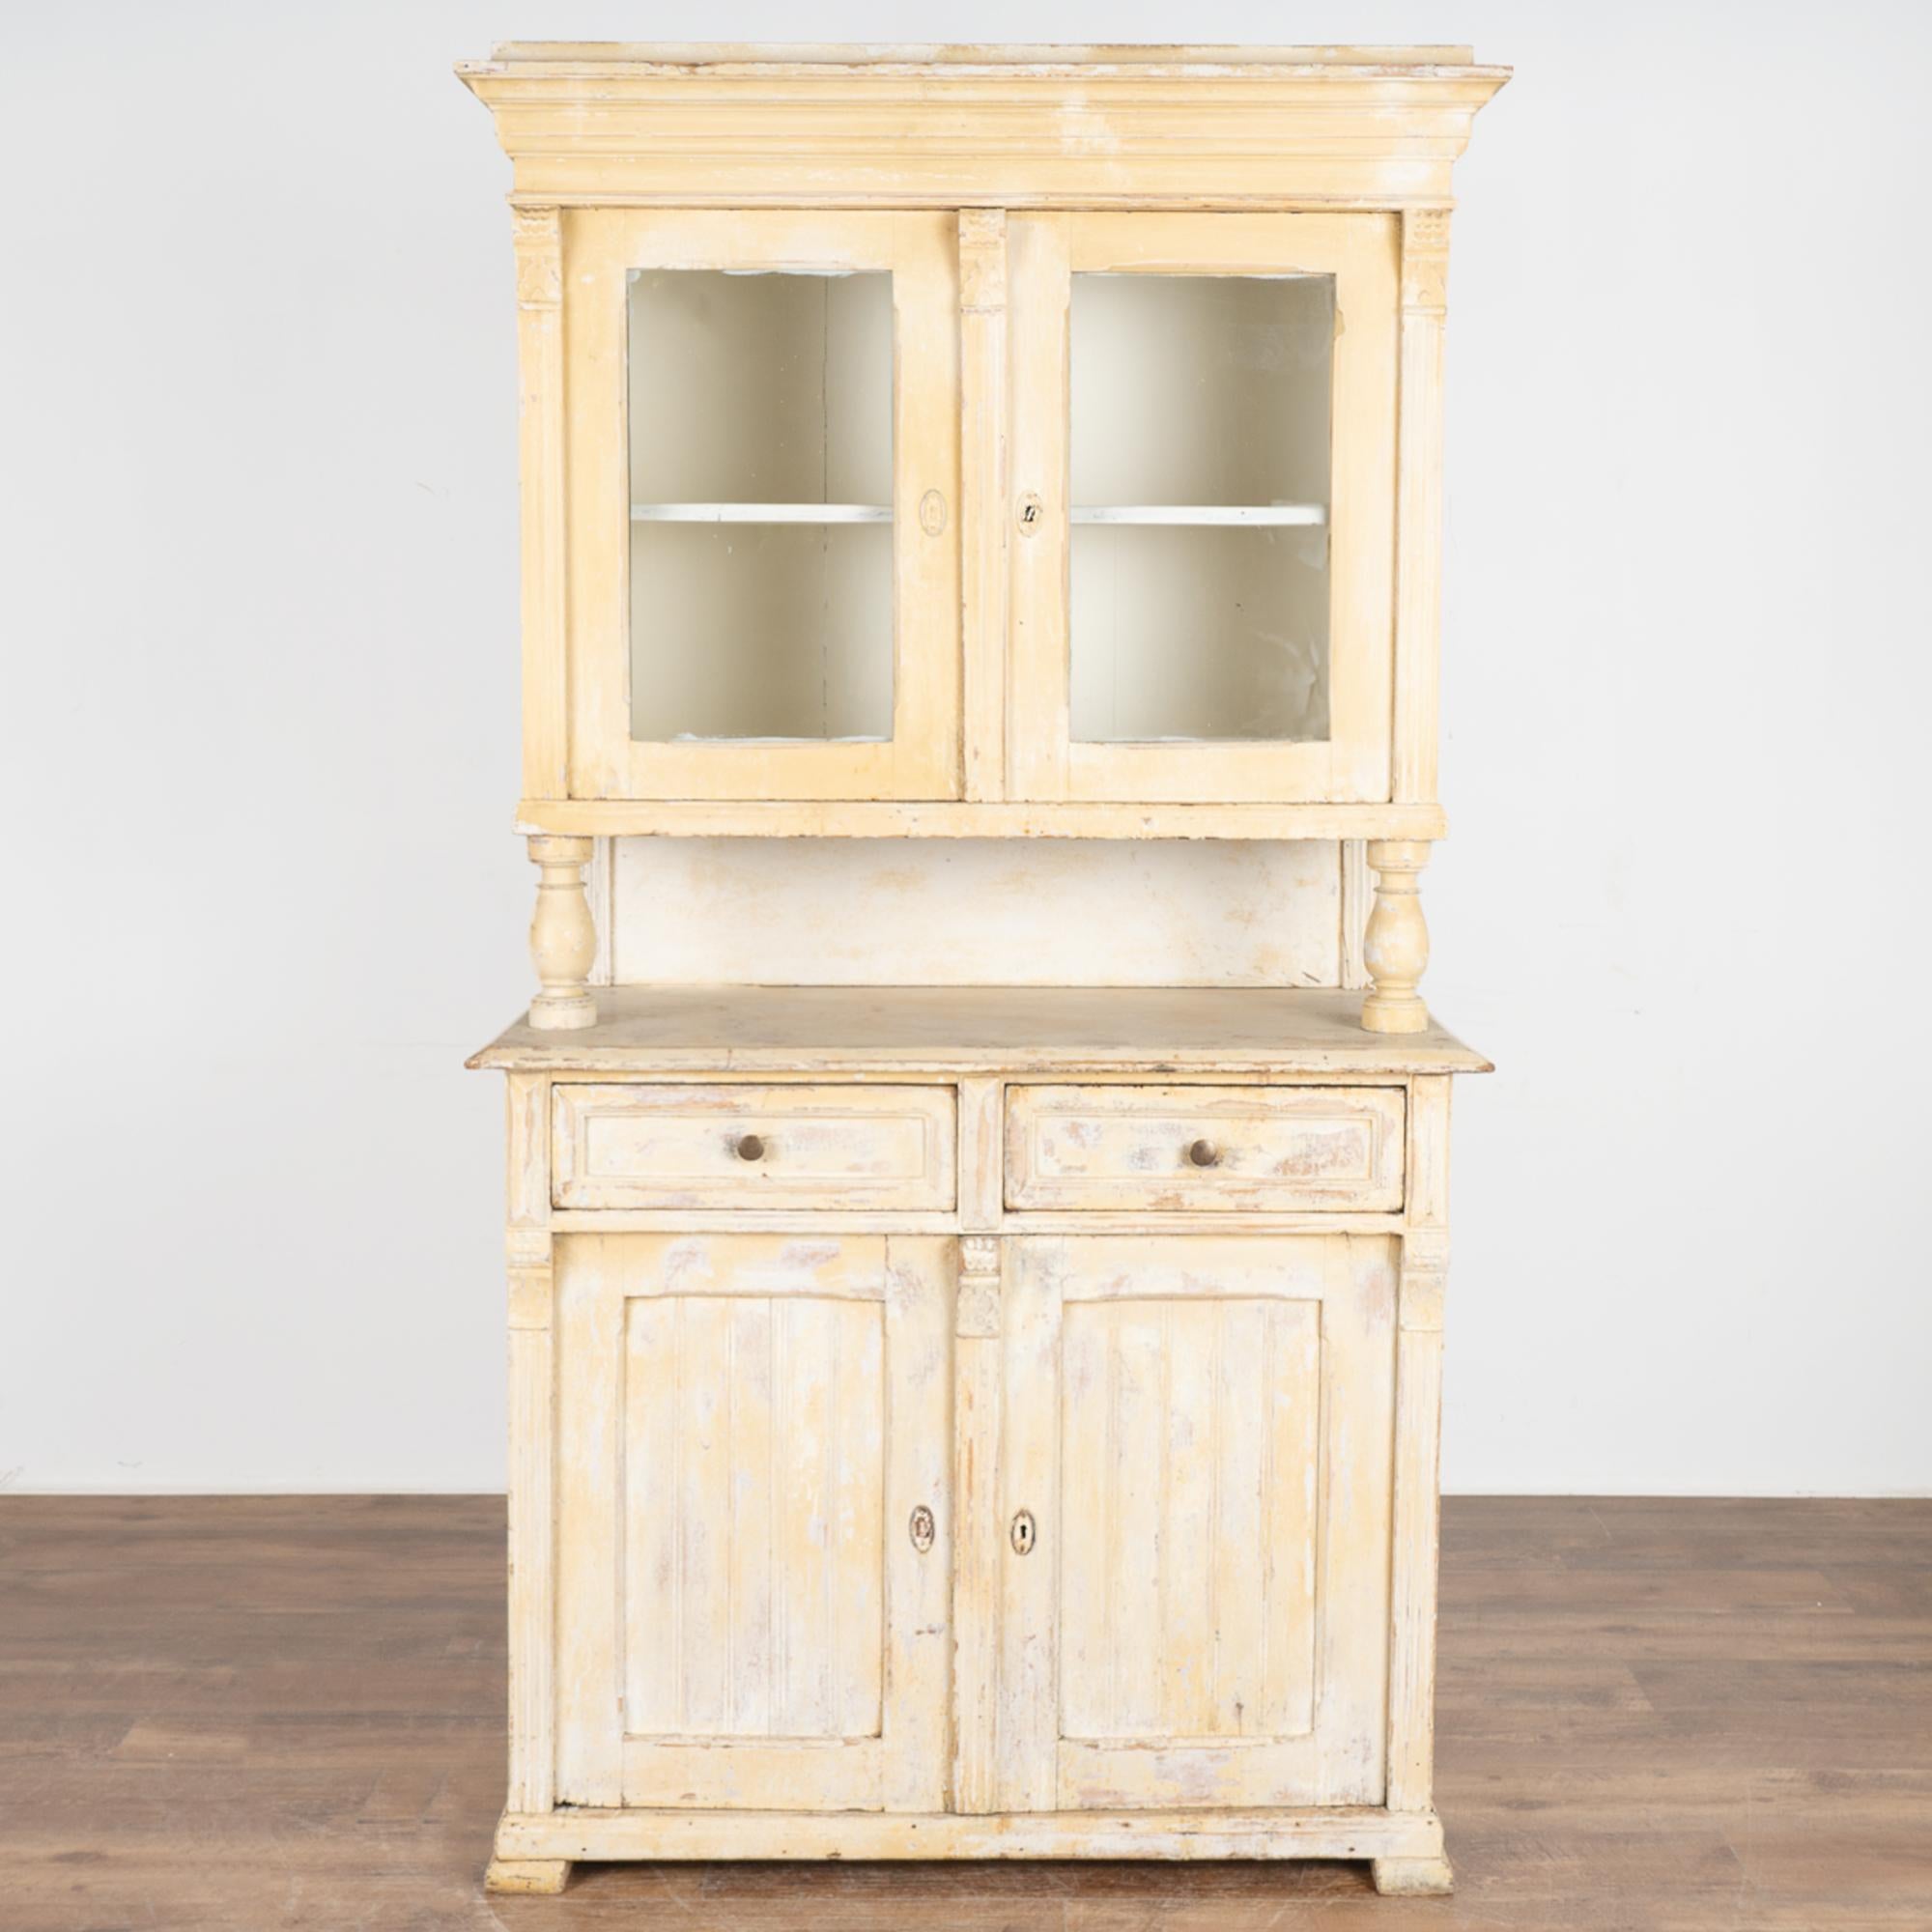 Hungarian Antique Painted Pine Cupboard Cabinet, Hungary circa 1890 For Sale